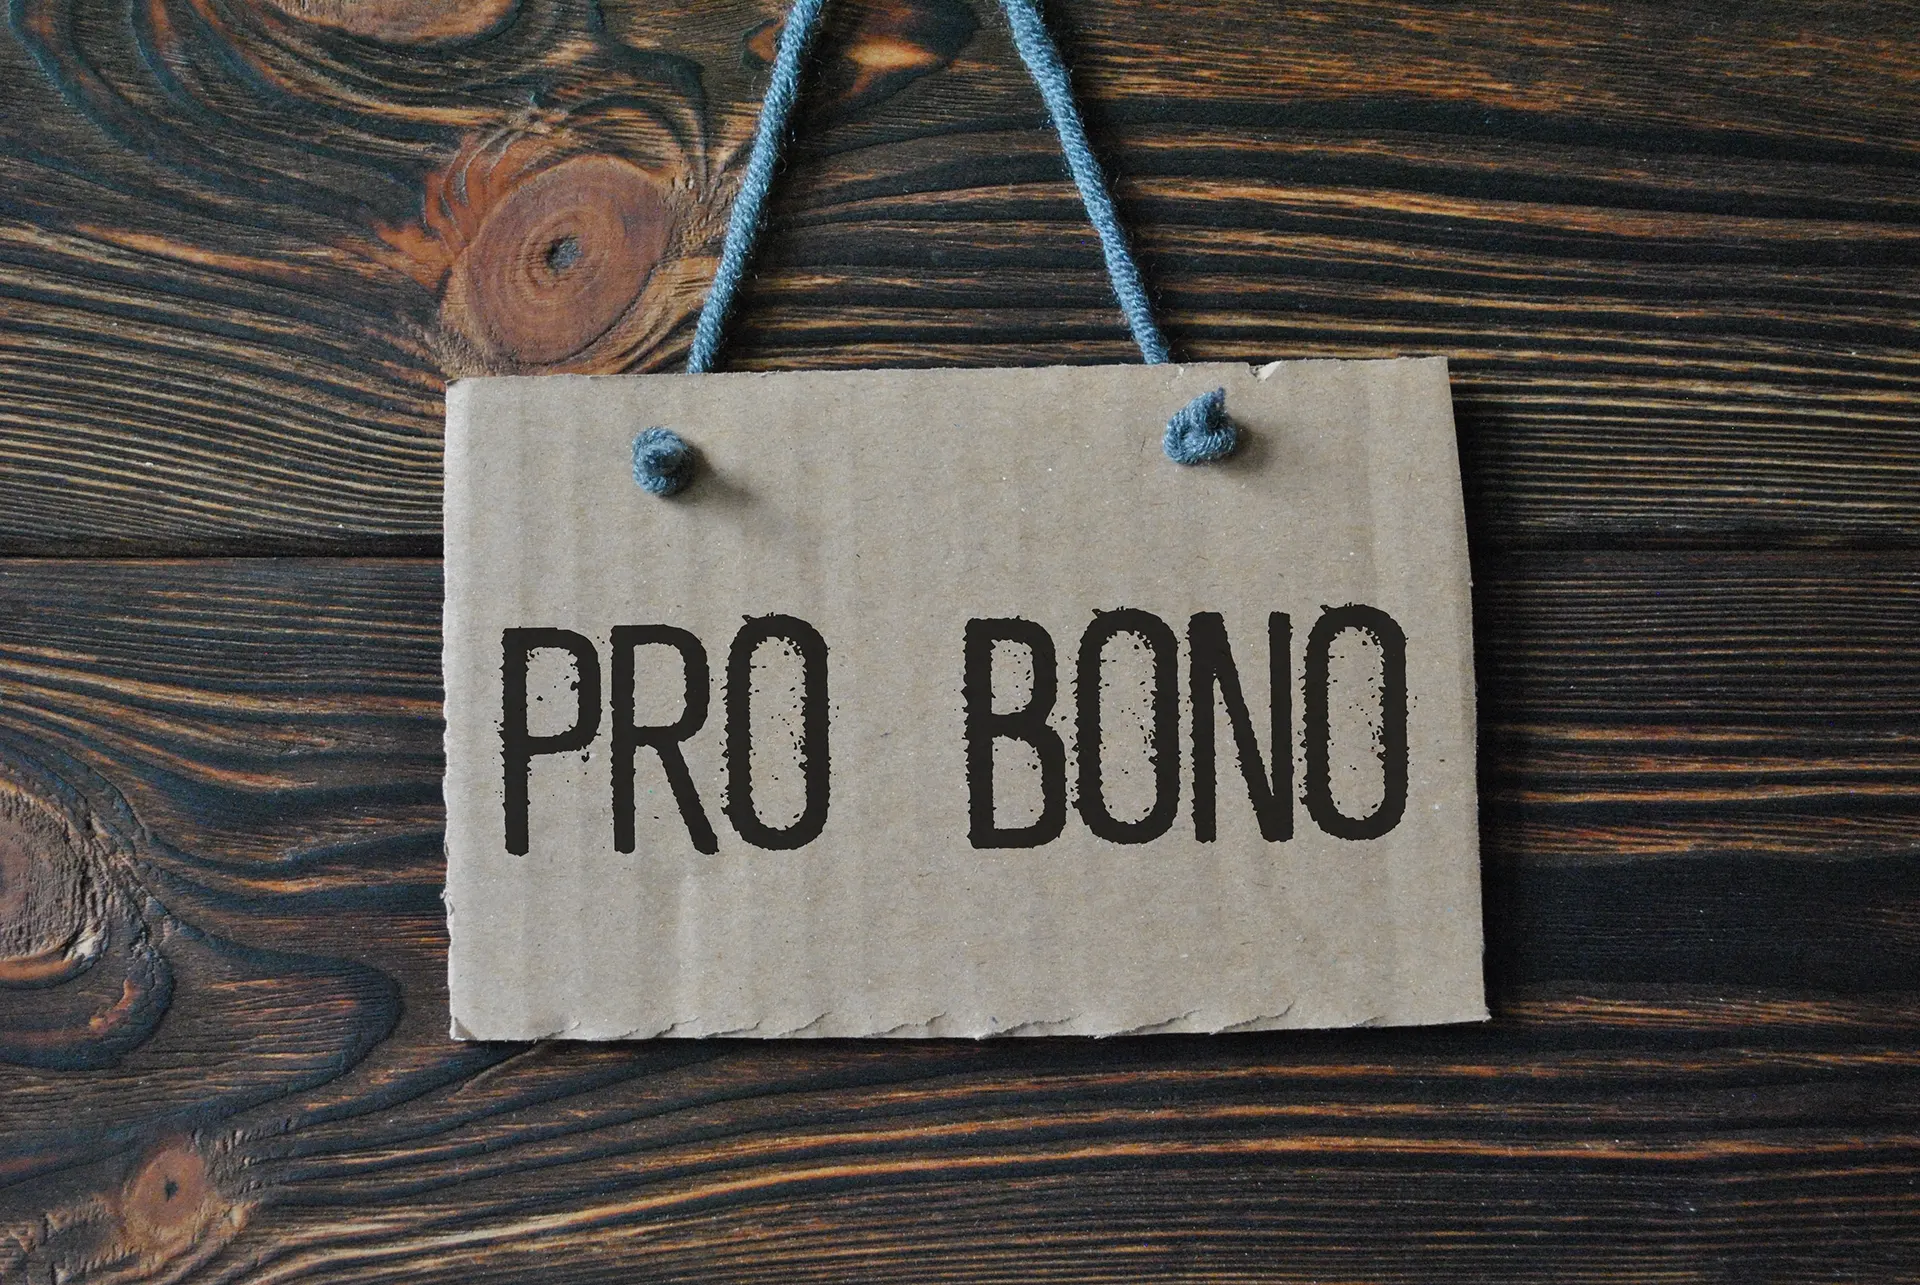 How to Find a Free or Pro Bono Texas Workers' Comp Lawyer